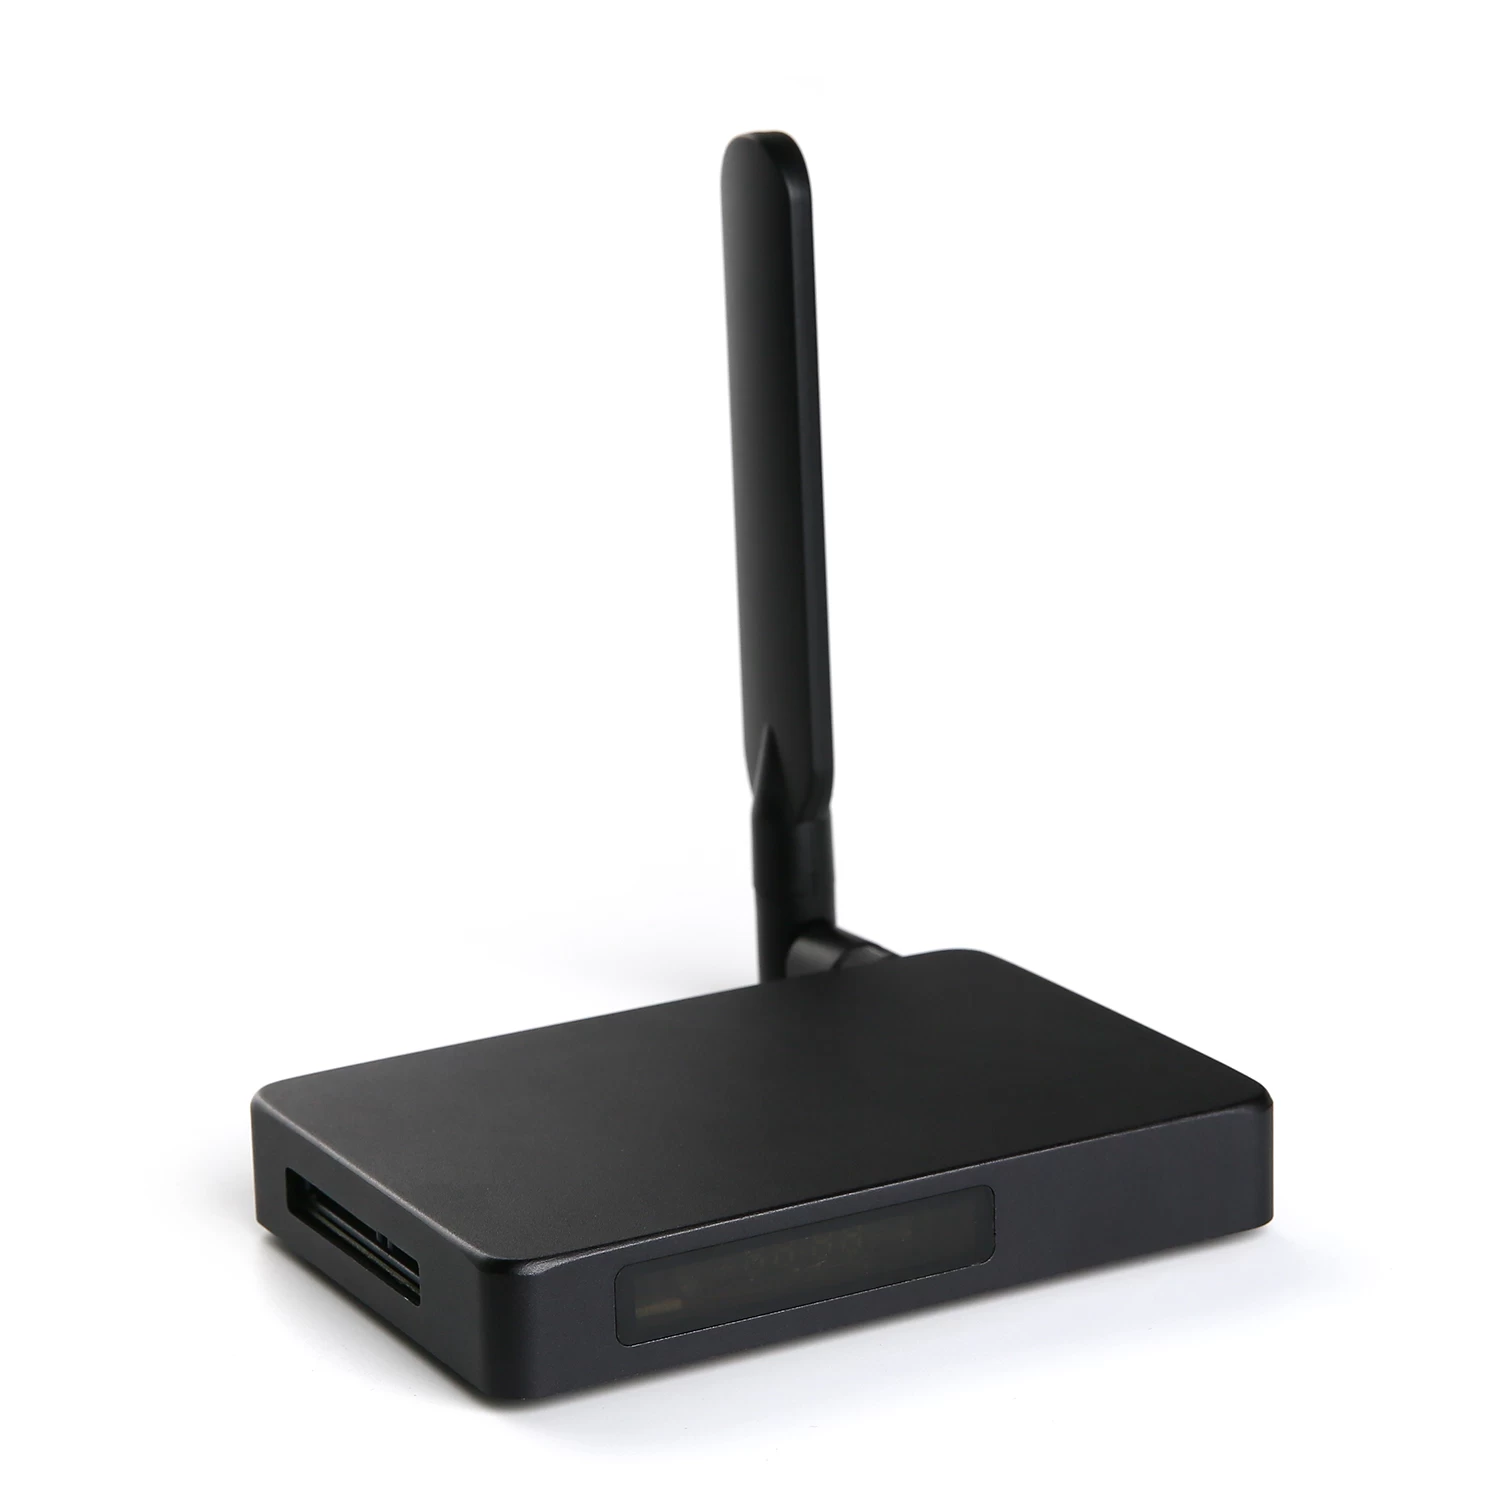 Android Stick PC HDMI input, Android Media Stick HDMI input, Stick TV Android HDMI input